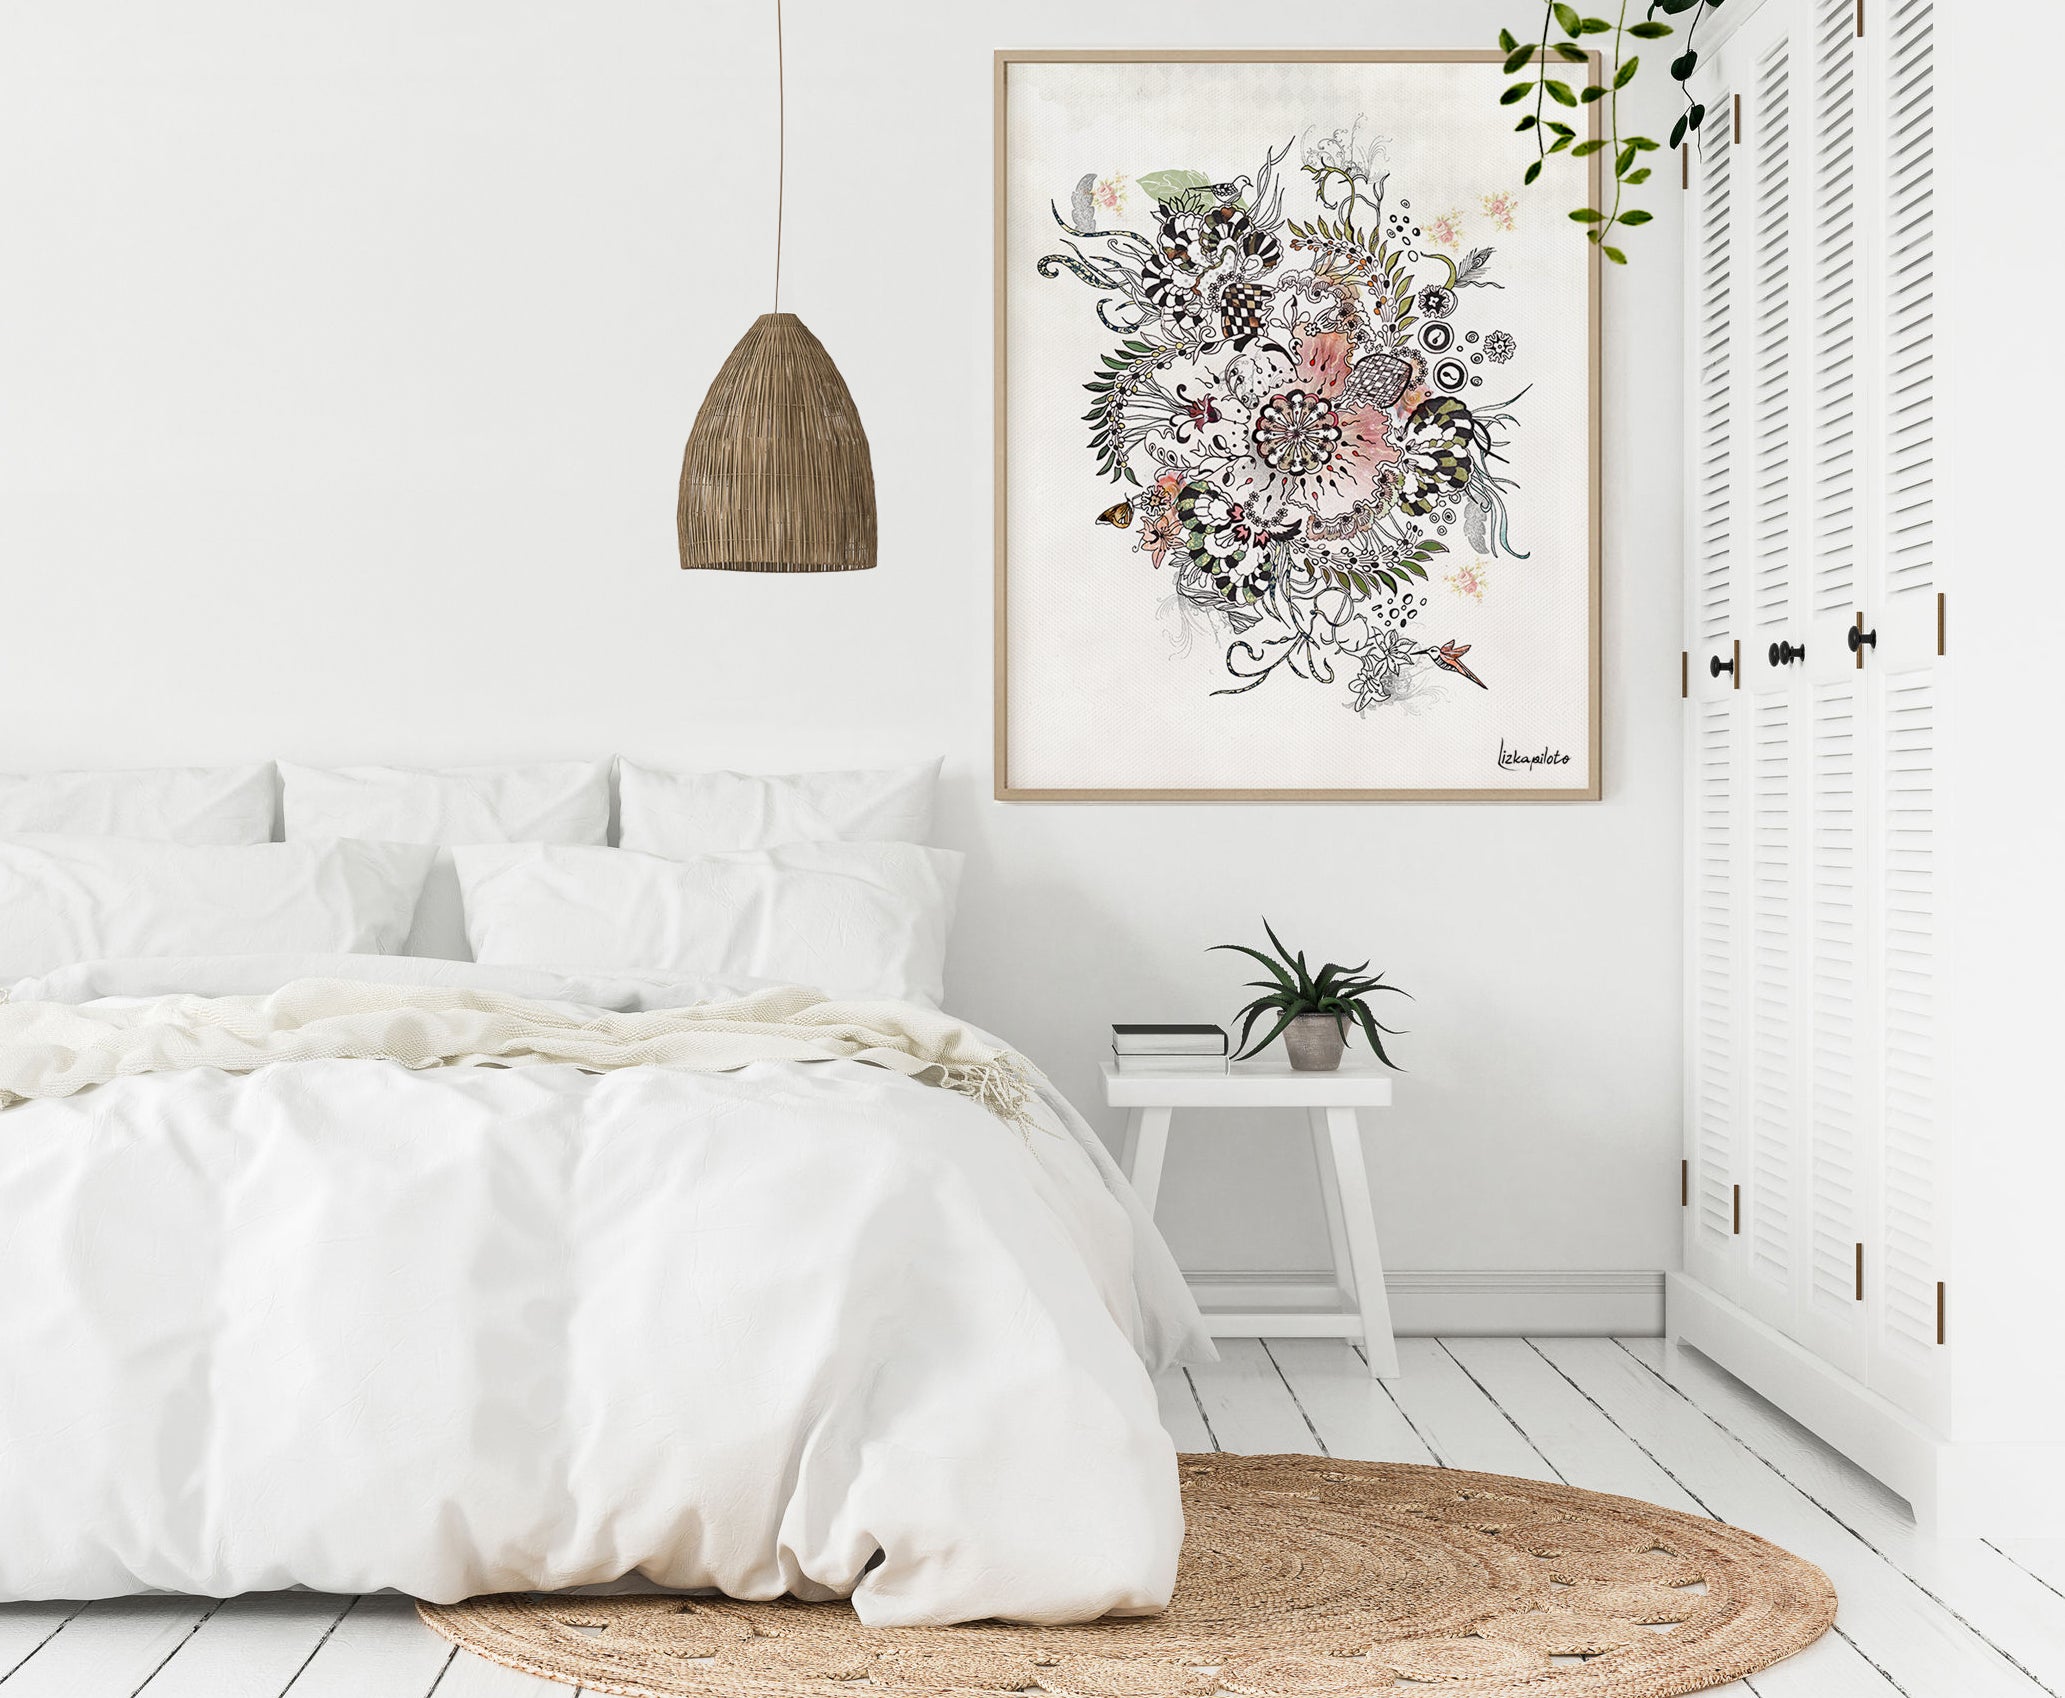 Red and black floral painting on a white wall above the bedroom bed 